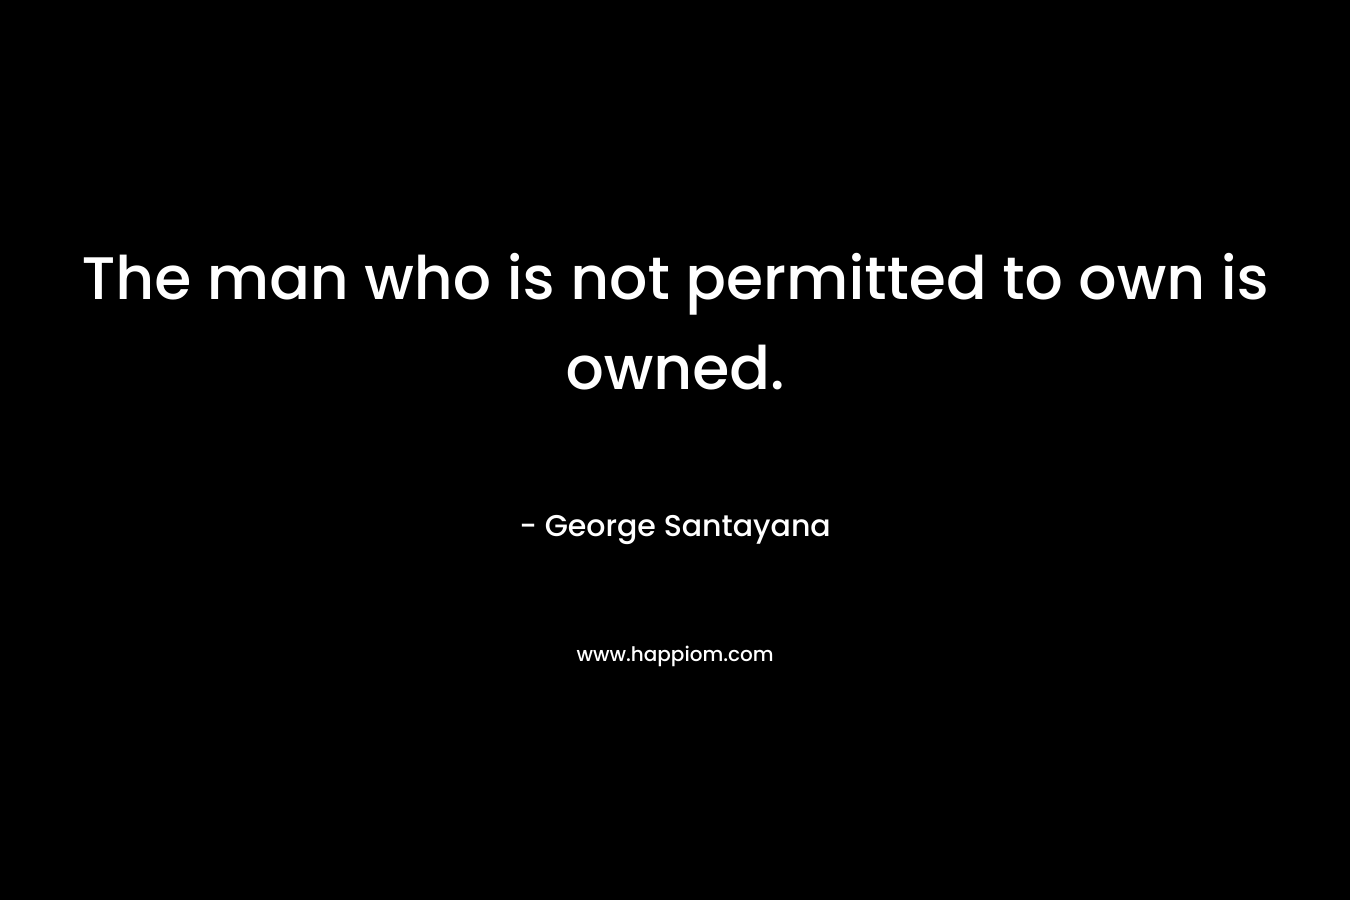 The man who is not permitted to own is owned. – George Santayana